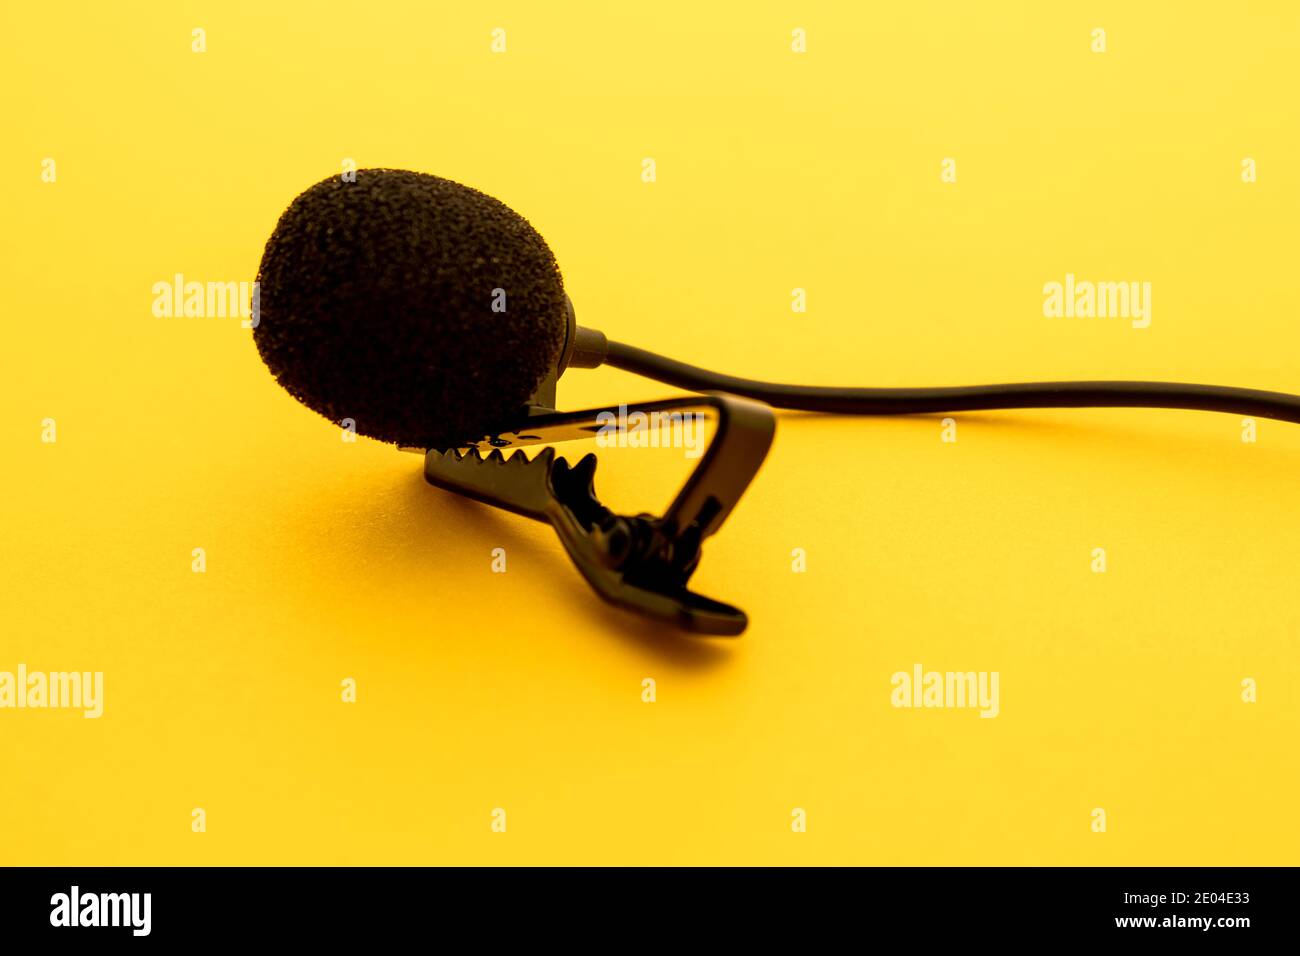 Lavalier or lapel microphone on a yellow surface, very close-up. The details of the grip clip or bra and the sponge against the wind are visible. Stock Photo